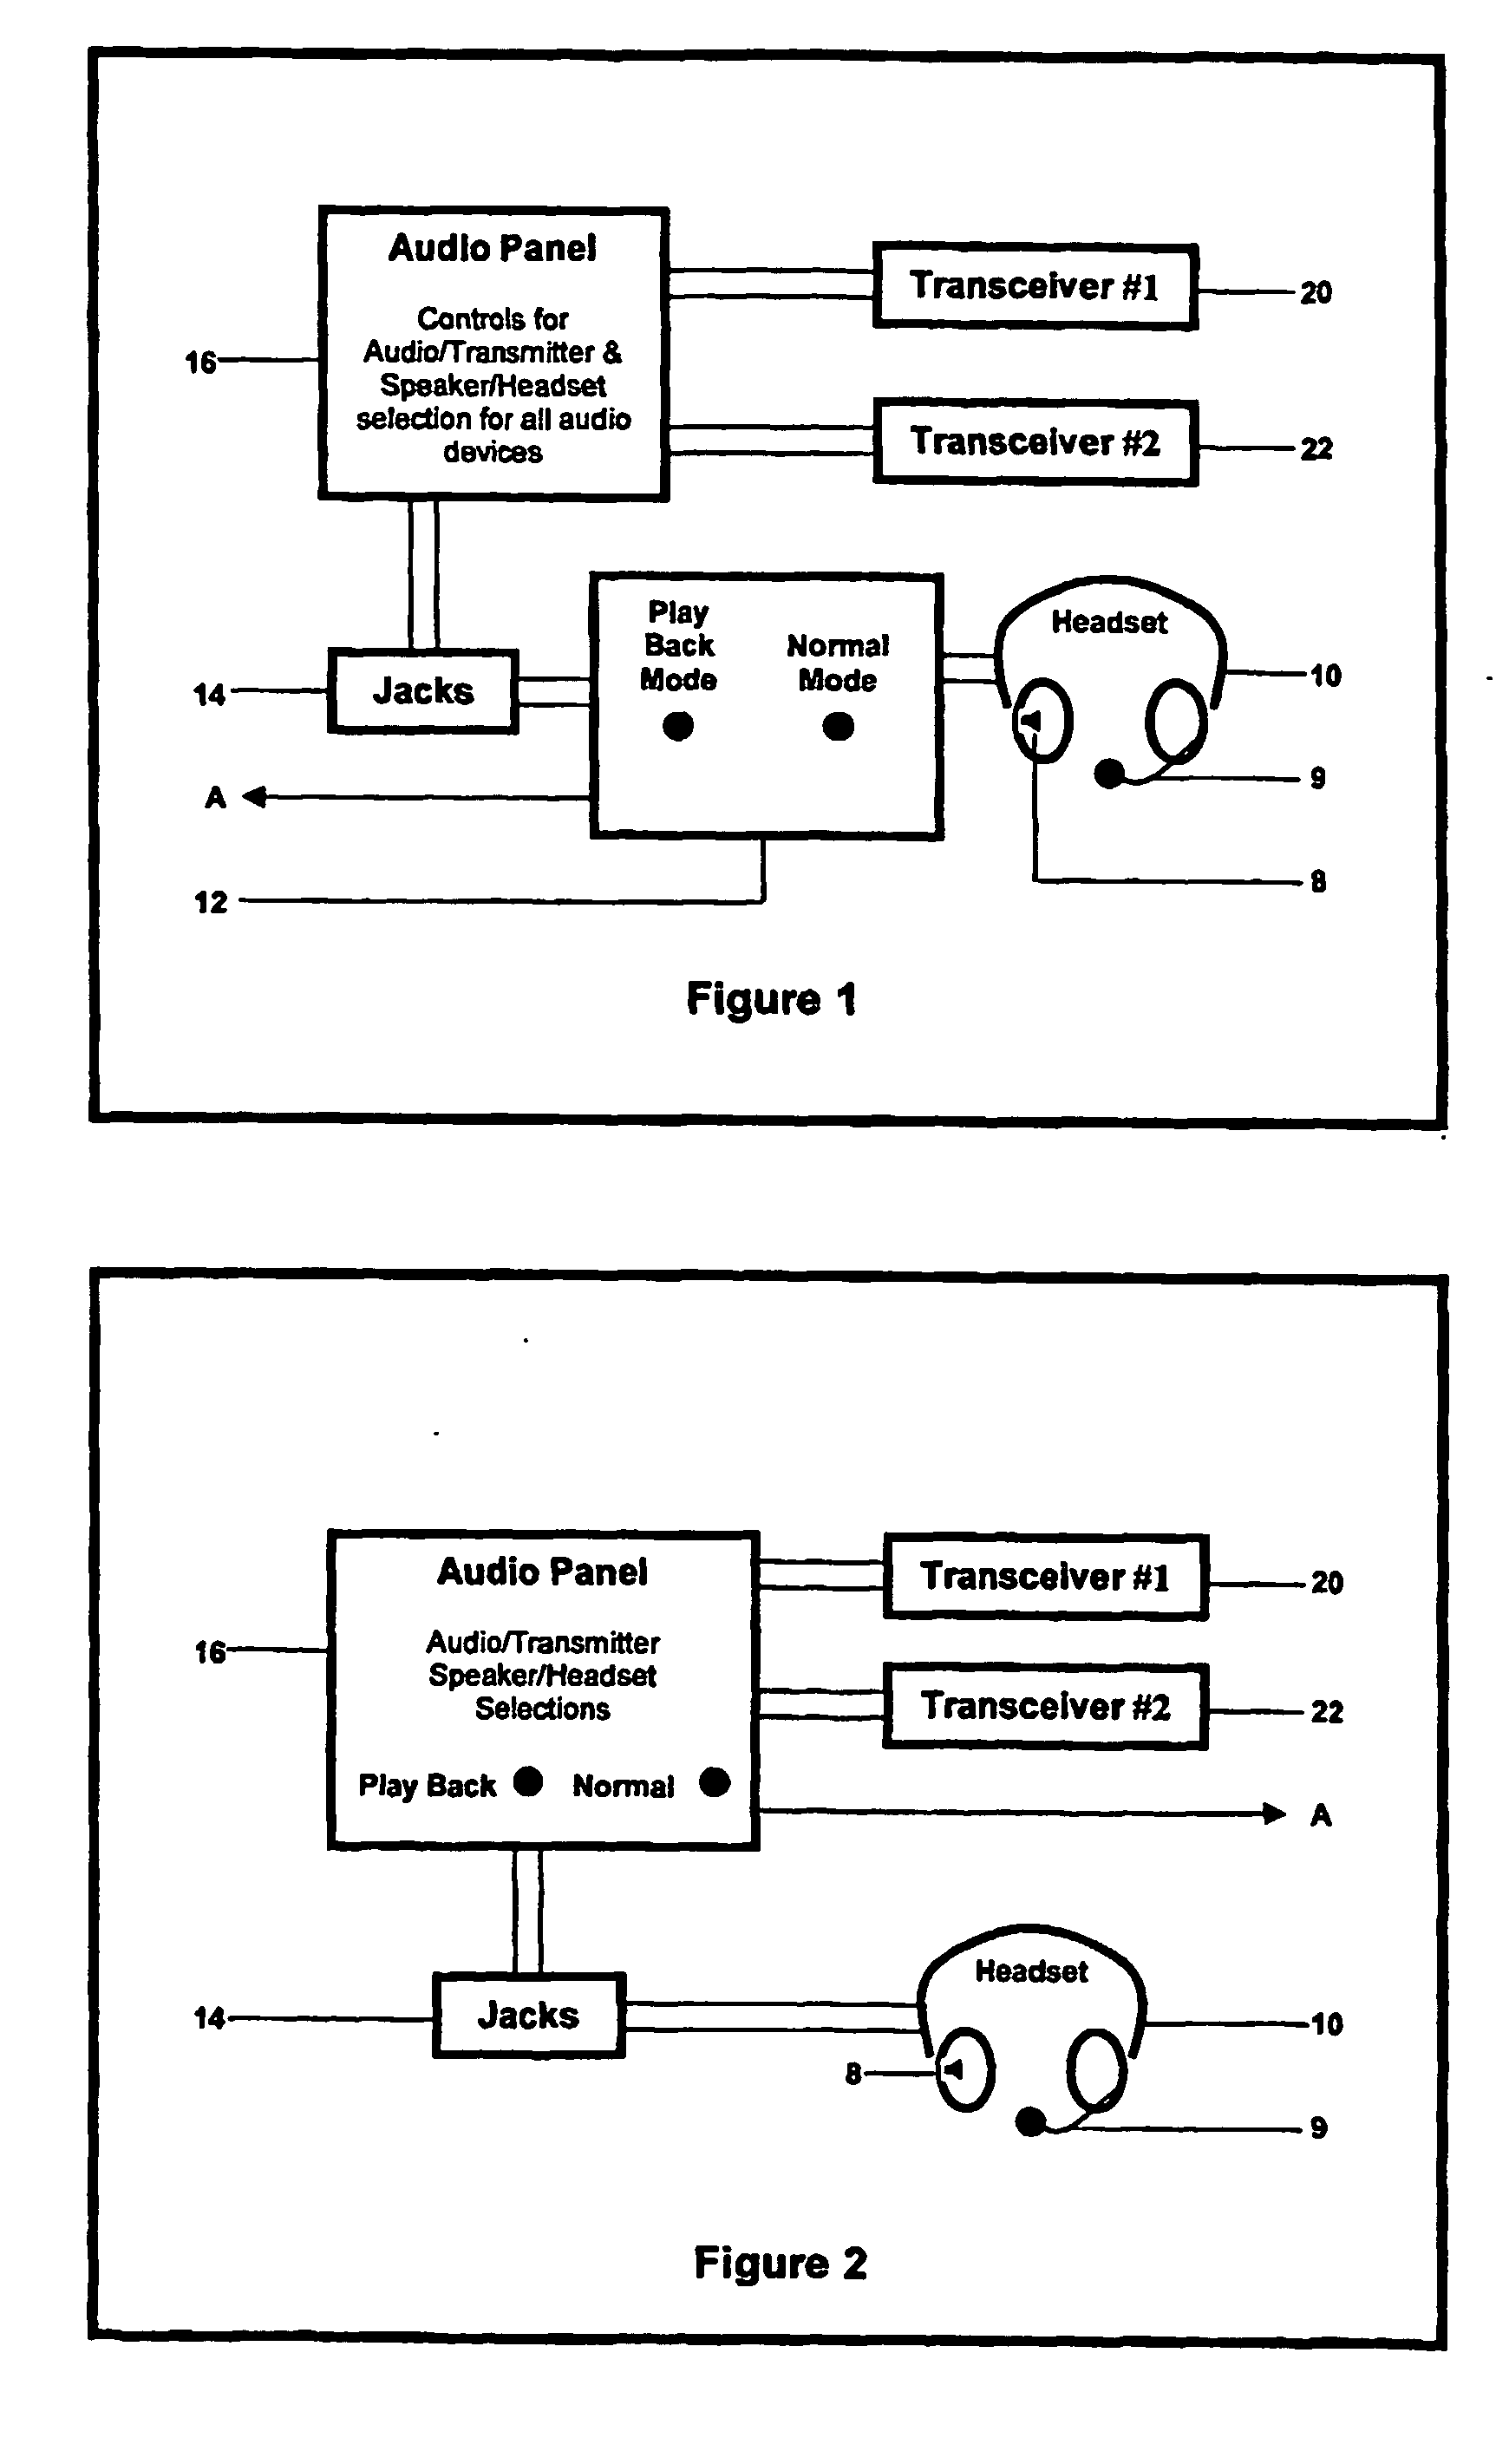 Recorded communication system for aircraft